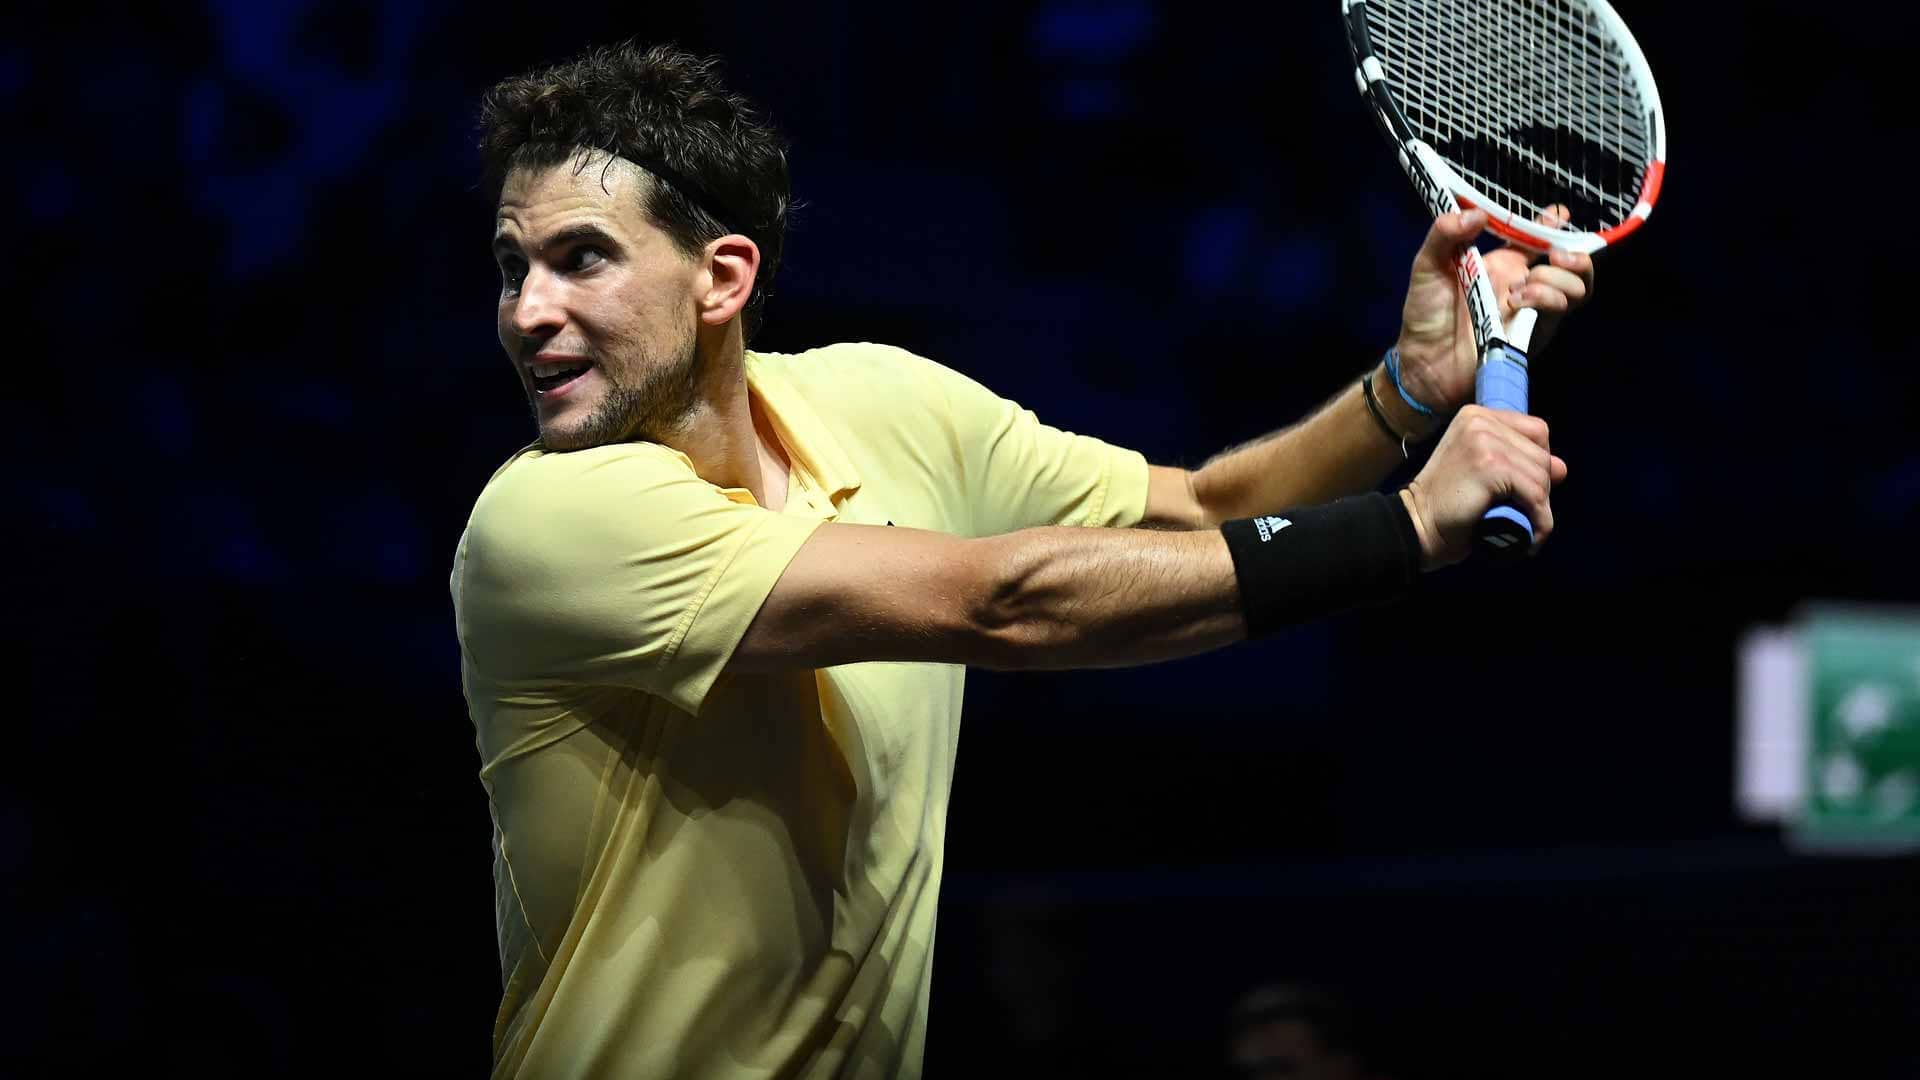 Dominic Thiem defeats Richard Gasquet on Wednesday in straight sets.